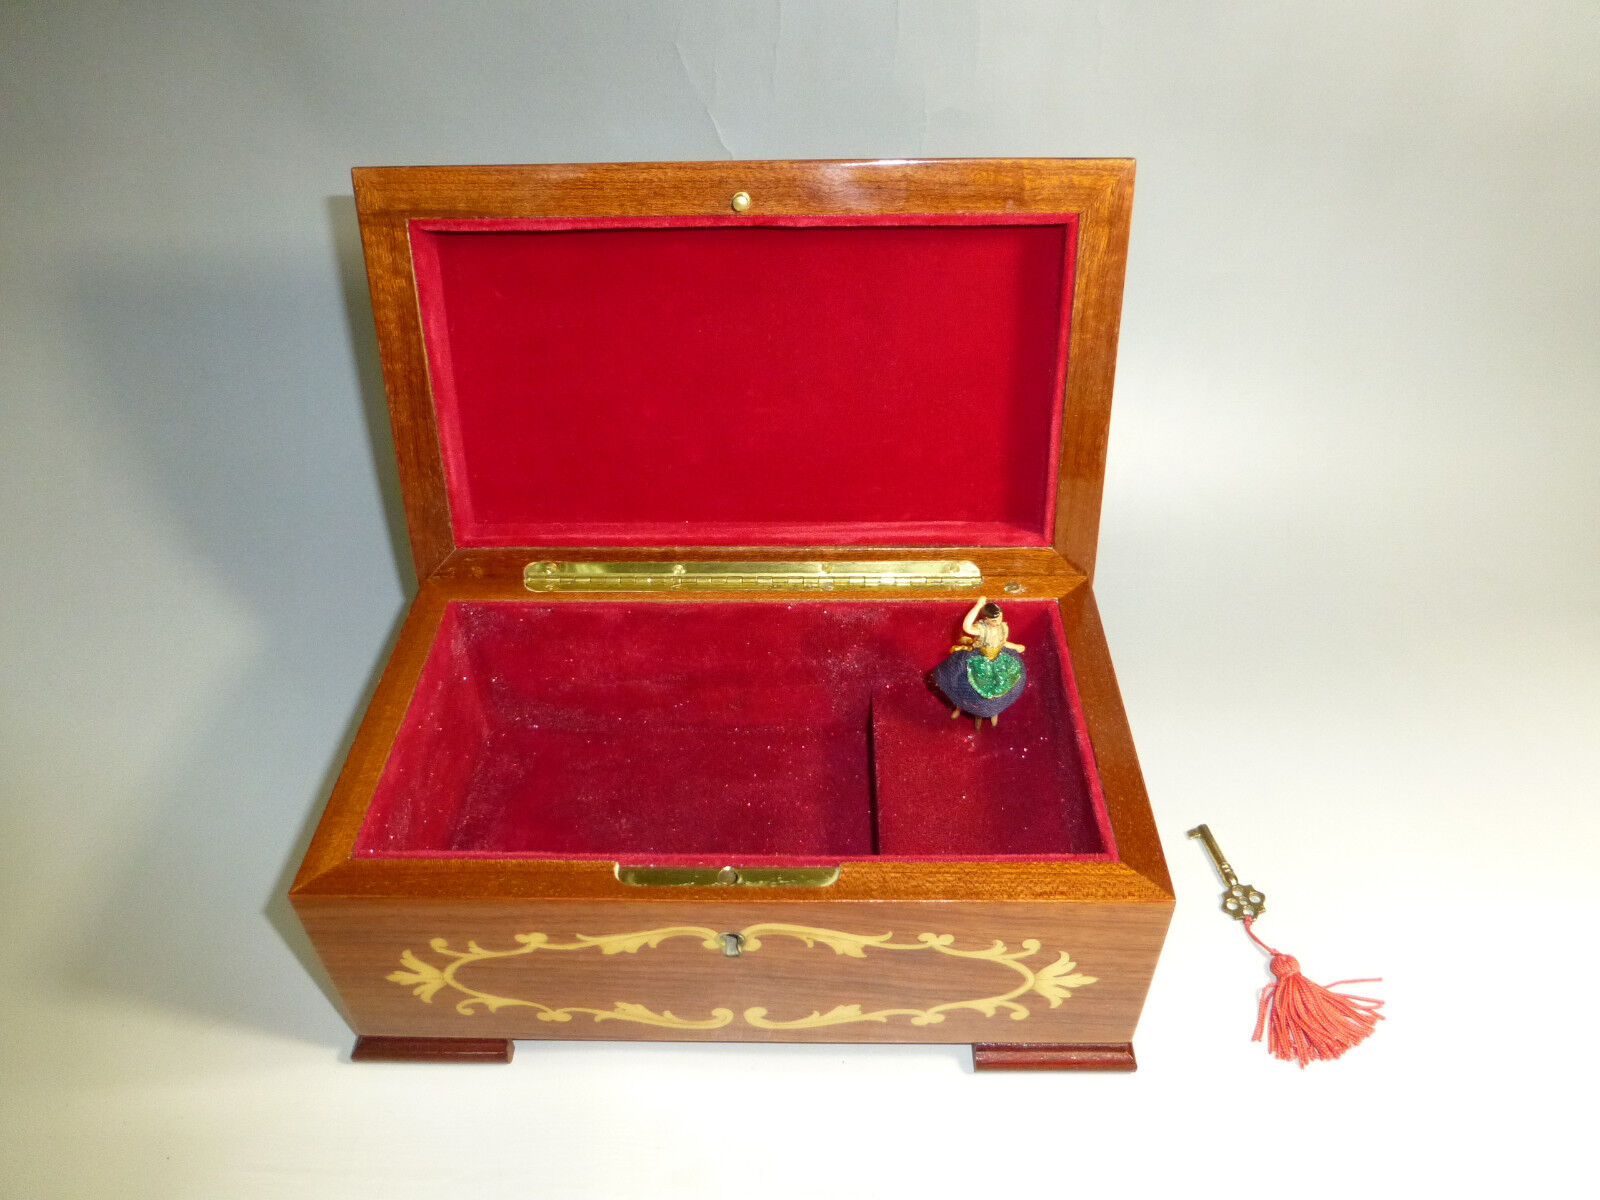 EXC VINTAGE REUGE DANCING BALLERINA MUSIC JEWELRY BOX JUST SERVICED (SEE VIDEO)